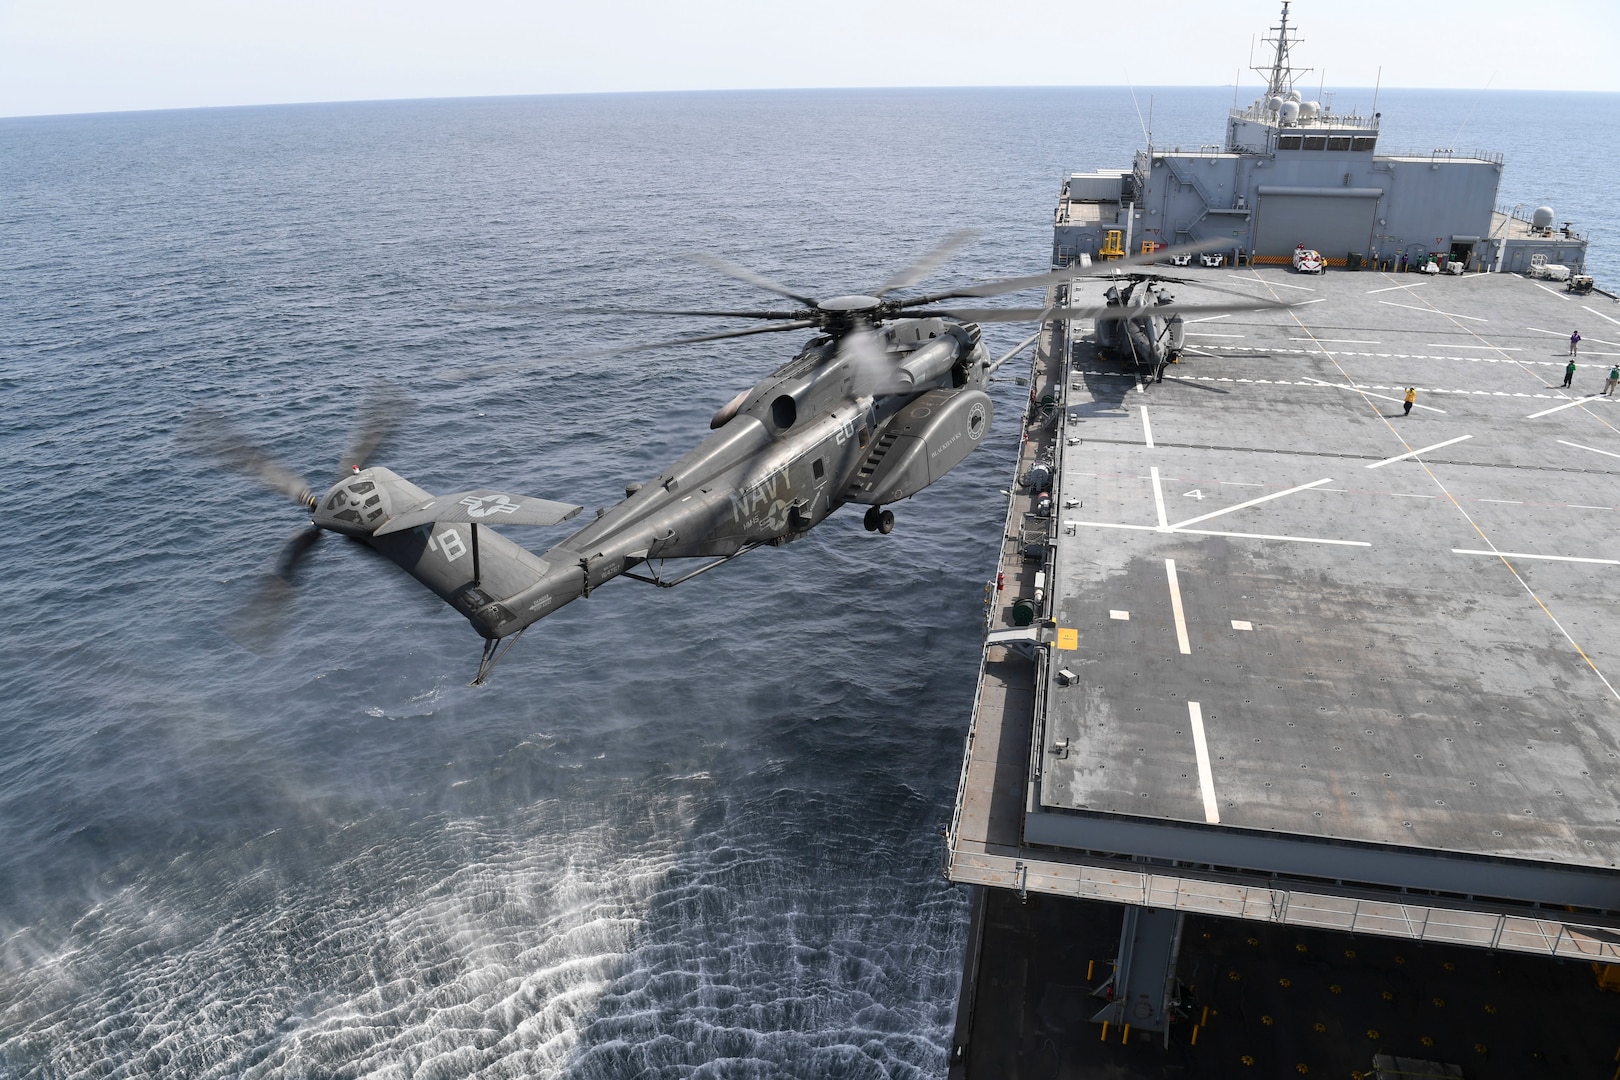 An MH-53E Sea Dragon, from Helicopter Mine Countermeasures Squadron (HM) 15, prepare to land on expeditionary mobile base platform ship USS Lewis B. Puller (ESB 3). Puller is deployed to the U.S. 5th Fleet area of operations in support of naval operations to ensure maritime stability and security in the Central Region, connecting the Mediterranean and the Pacific through the western Indian Ocean and three strategic choke points. (U.S. Navy photo by Mass Communication Specialist 2nd Class Kevin J. Steinberg/Released)